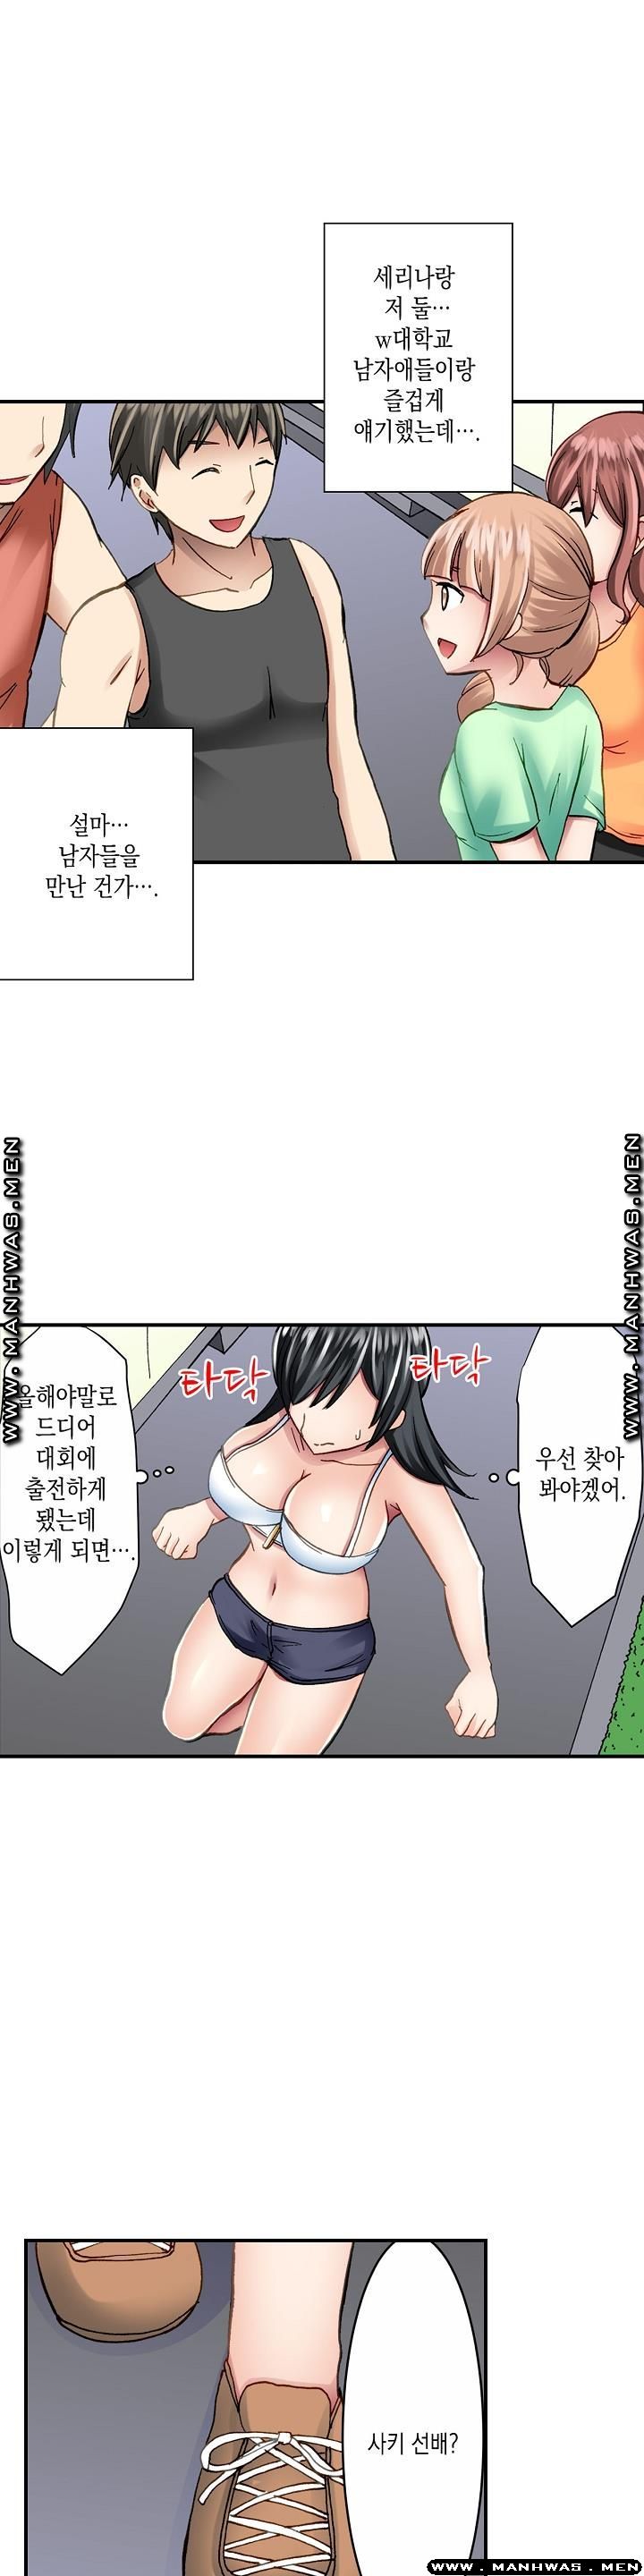 Nude Dance Raw - Chapter 9 Page 13